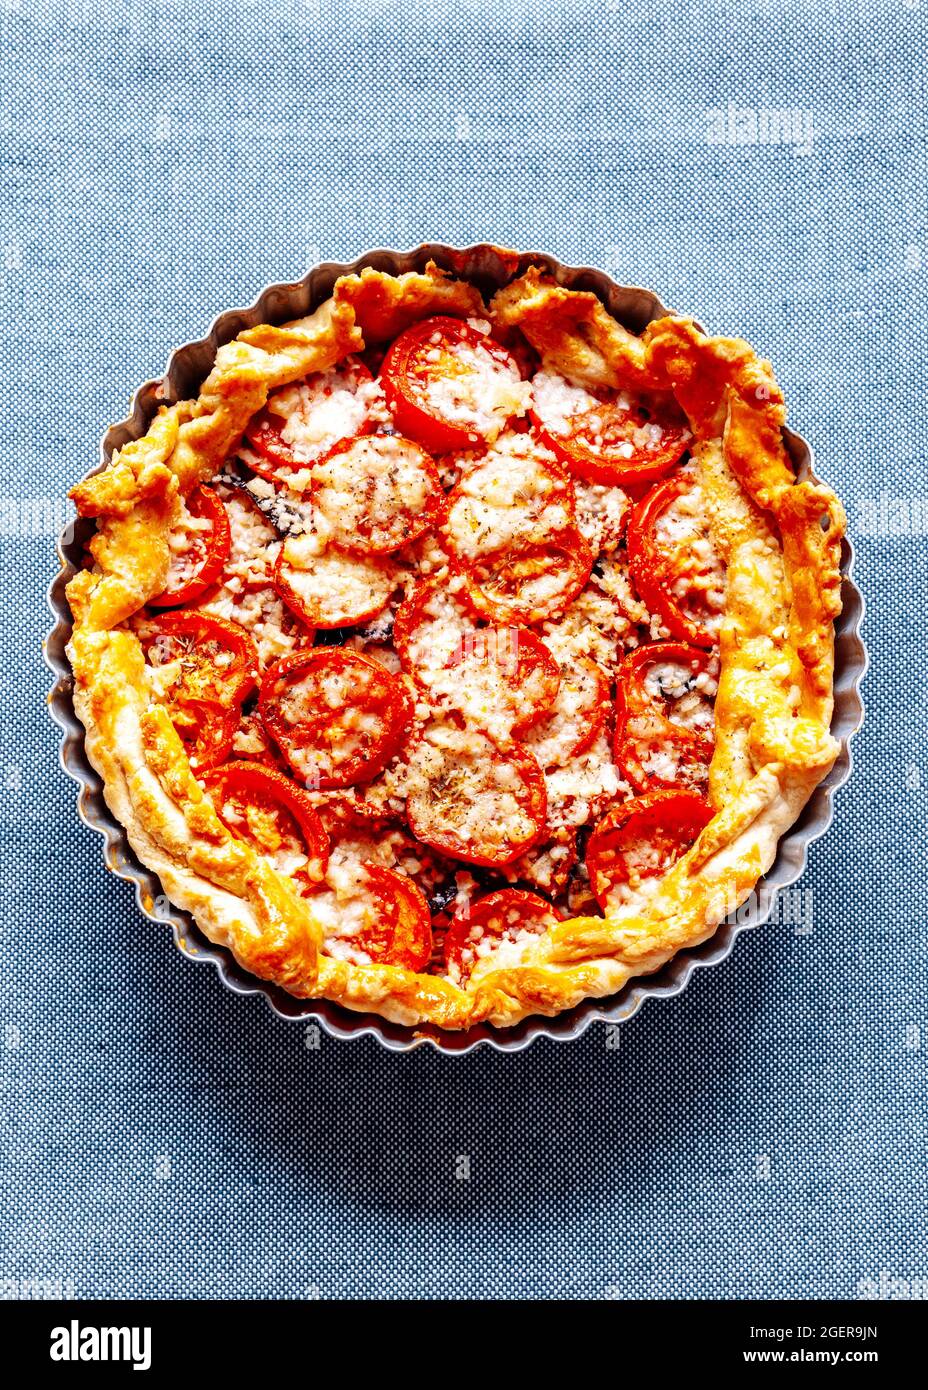 Tomato and Cheese Quiche on Plain Background Stock Photo